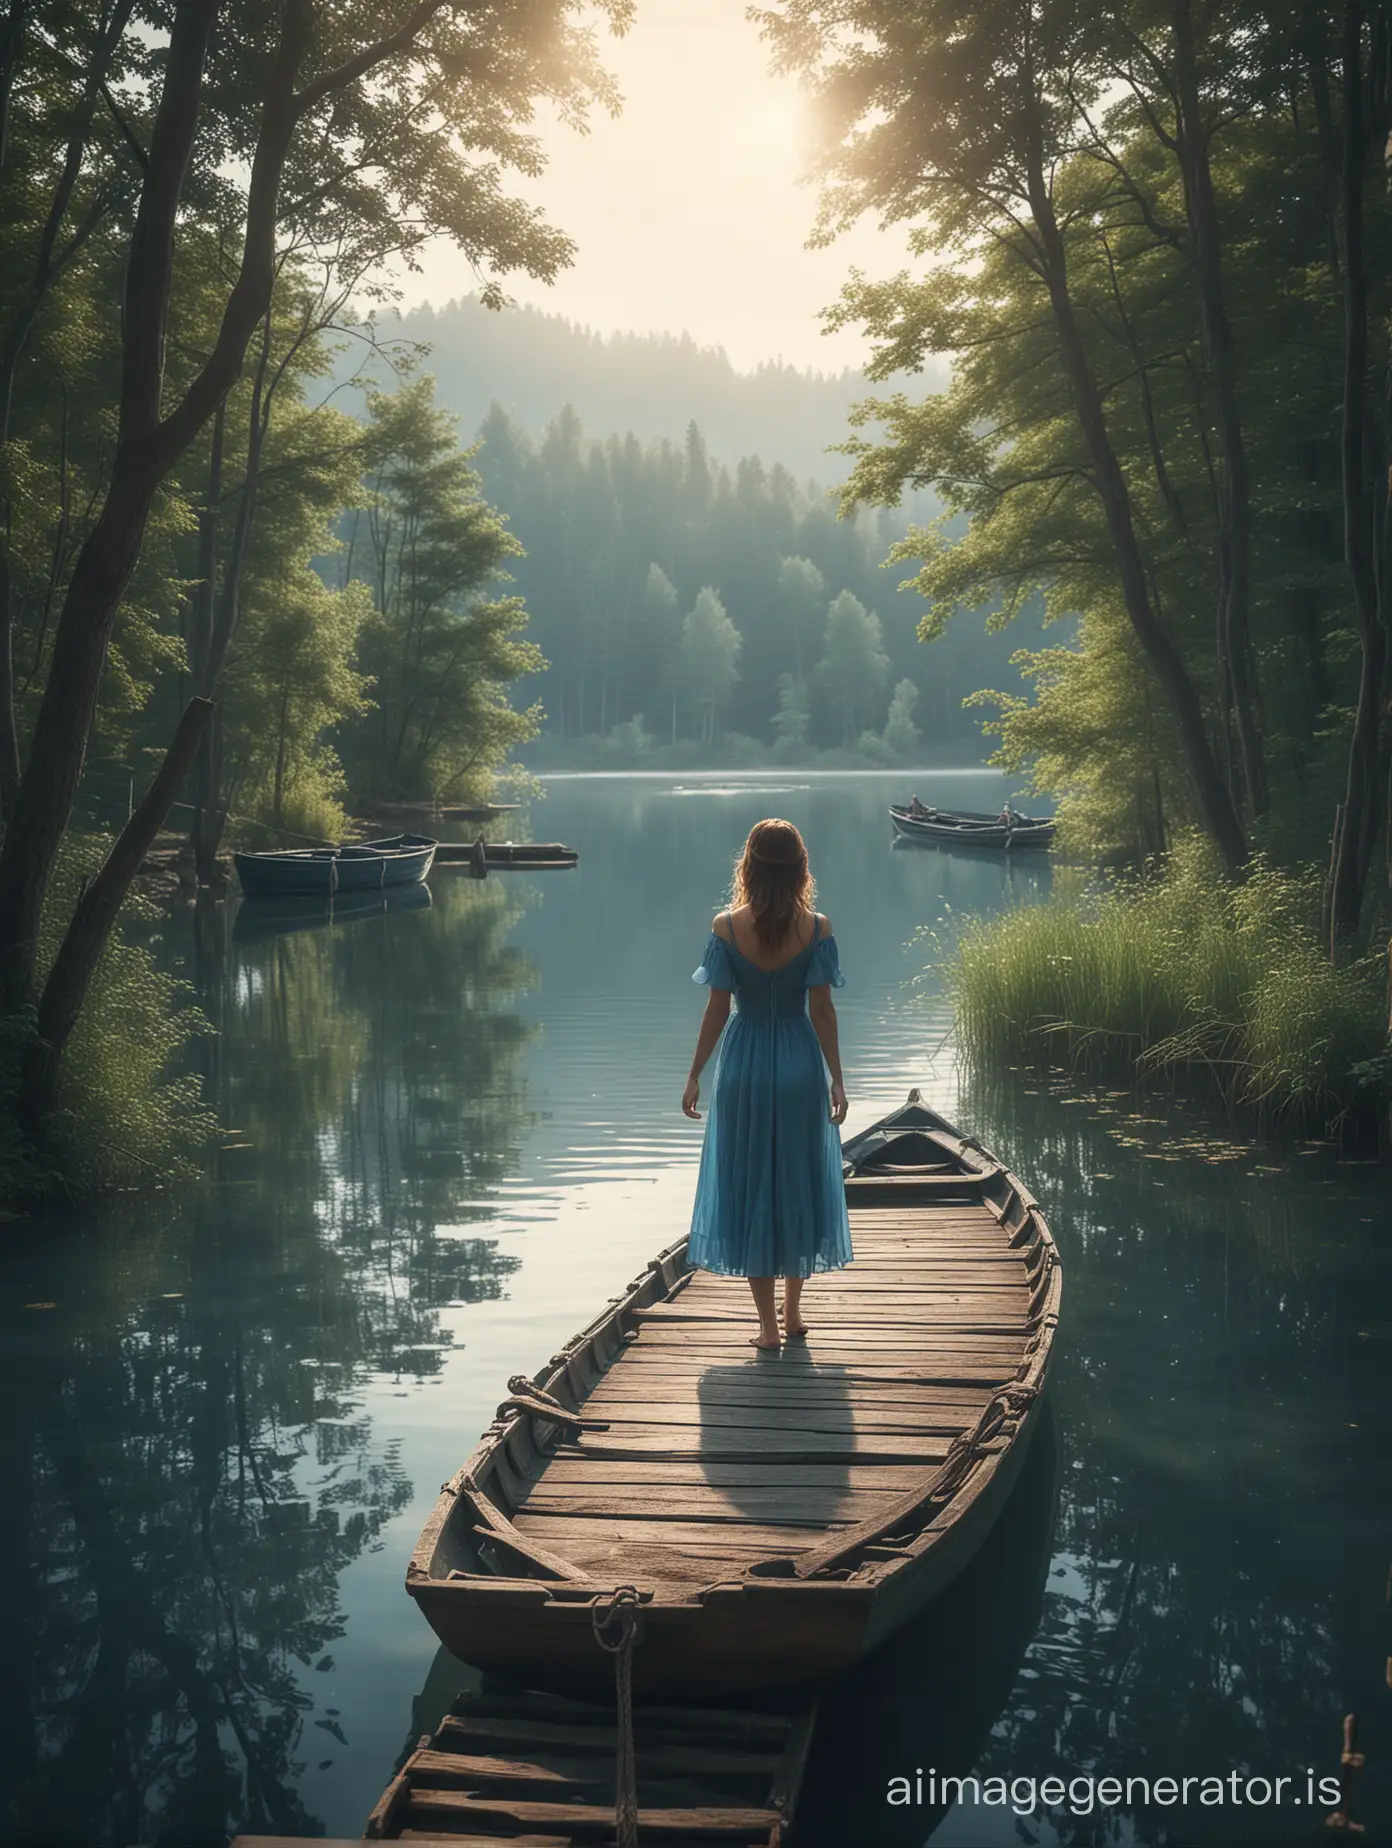 A beautiful woman in a blue dress standing on a wooden bridge near a rowboat, lake, and trees, in the style of fantasy, fantasy landscape, cinematic light, cinematic shot, hyper realistic photography.